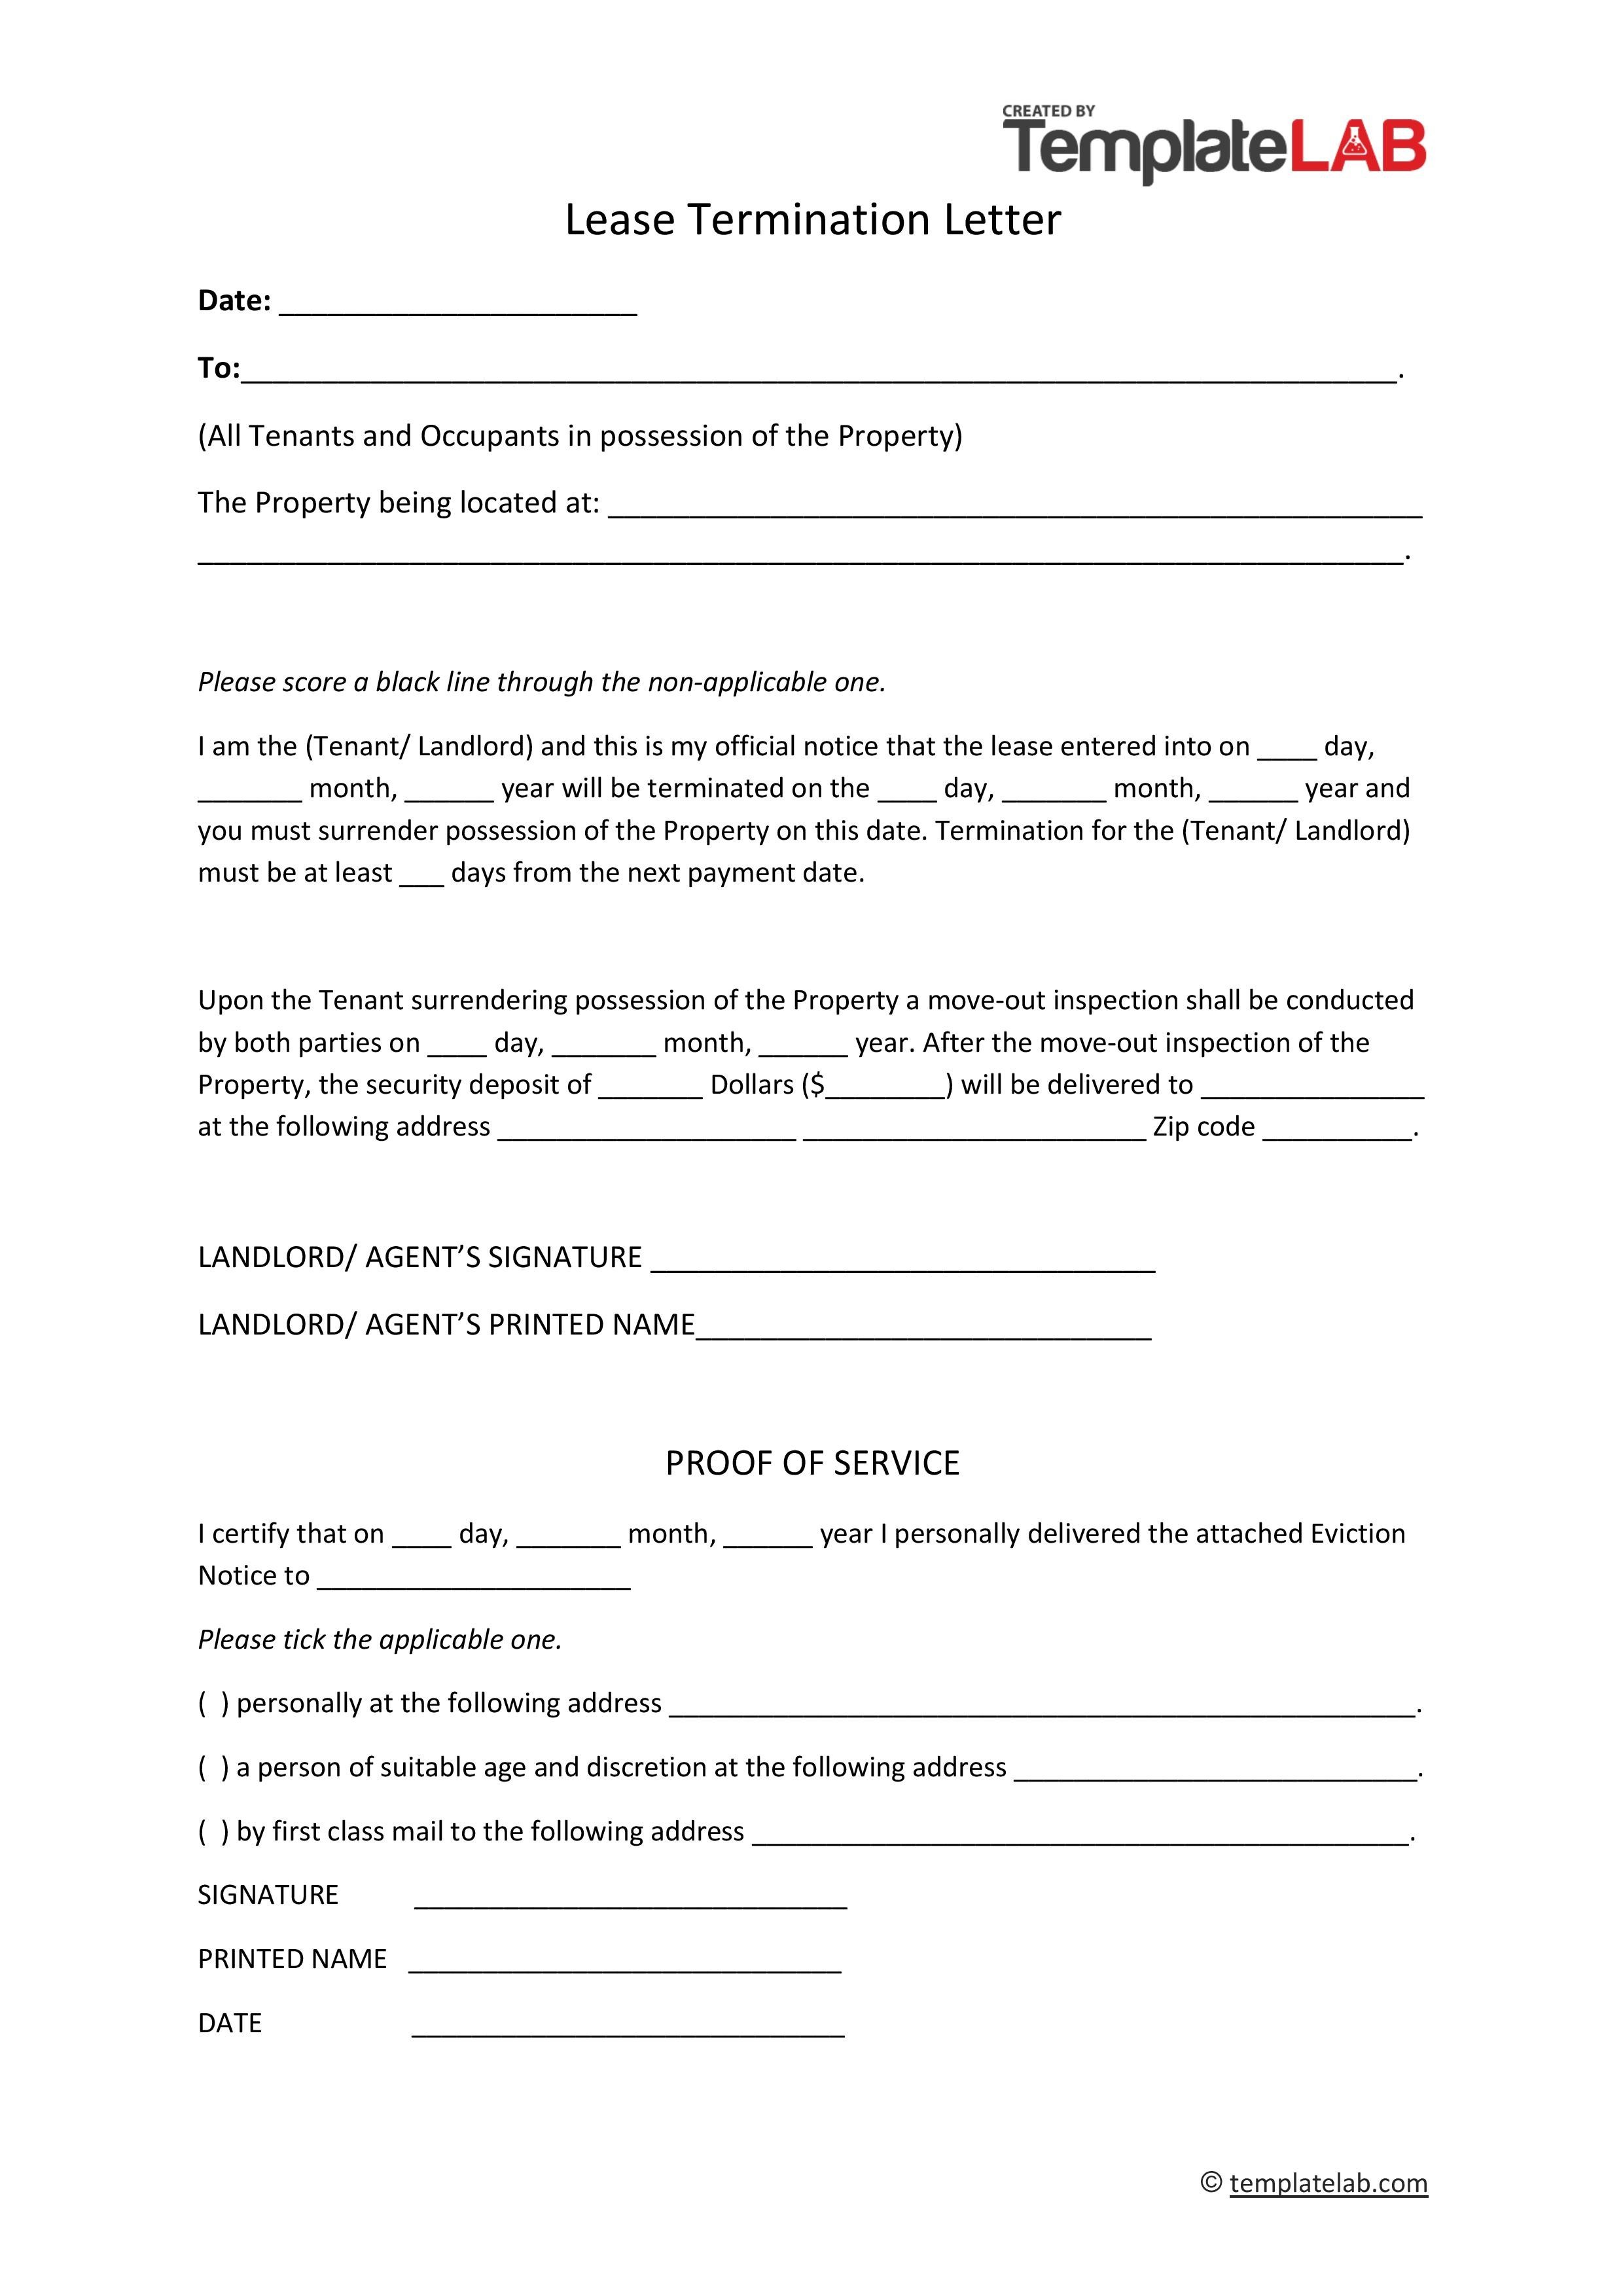 Free Lease Termination Letter